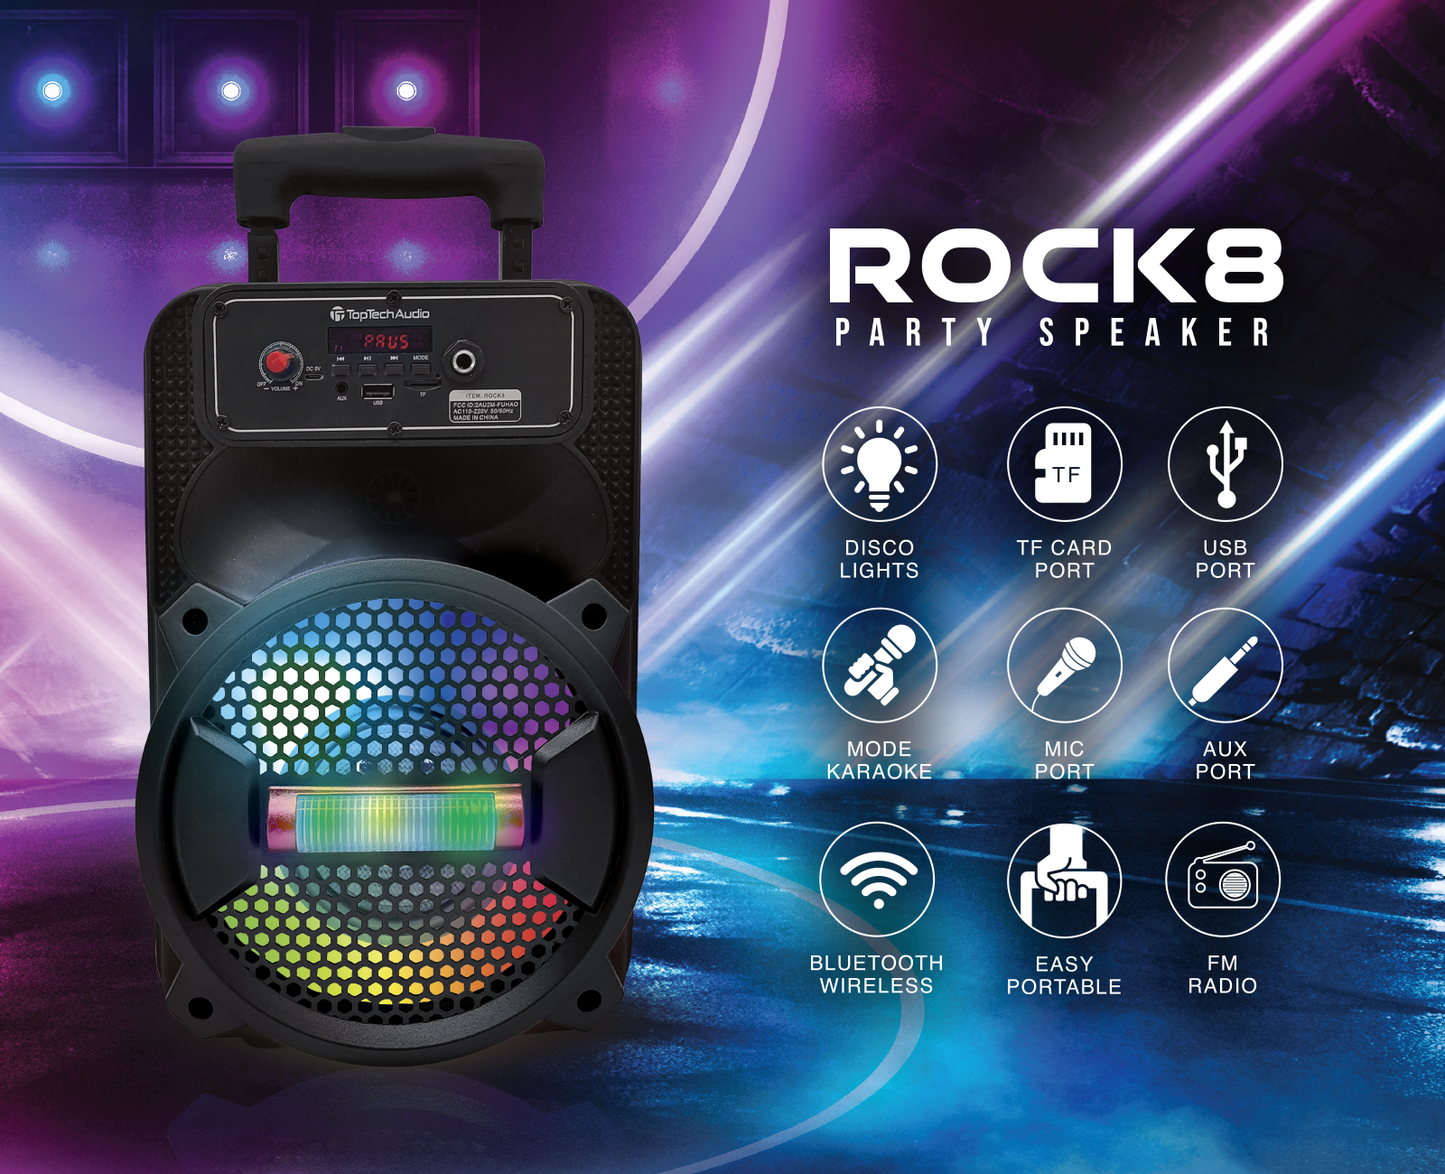 TOPTECH Rock-8, 8 Inch Wireless Bluetooth Speakers Portable Speaker with Mircrophone, Blazing Disco Lights, Remote Control, High-Fidelity Sound, 10M(33ft) Wireless Range,for Home/Party/Outdoor,Gift